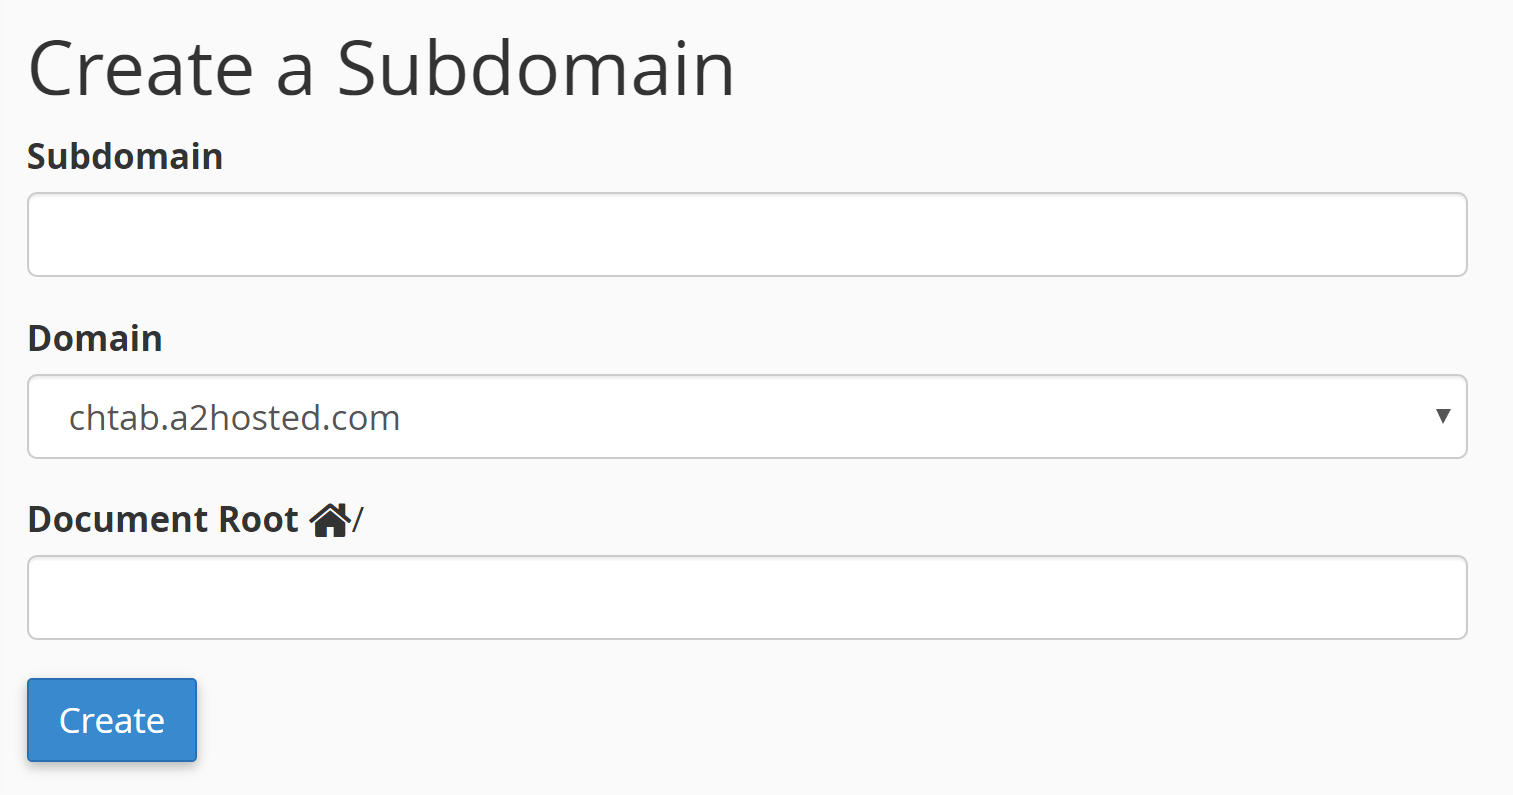 The settings for your subdomain.